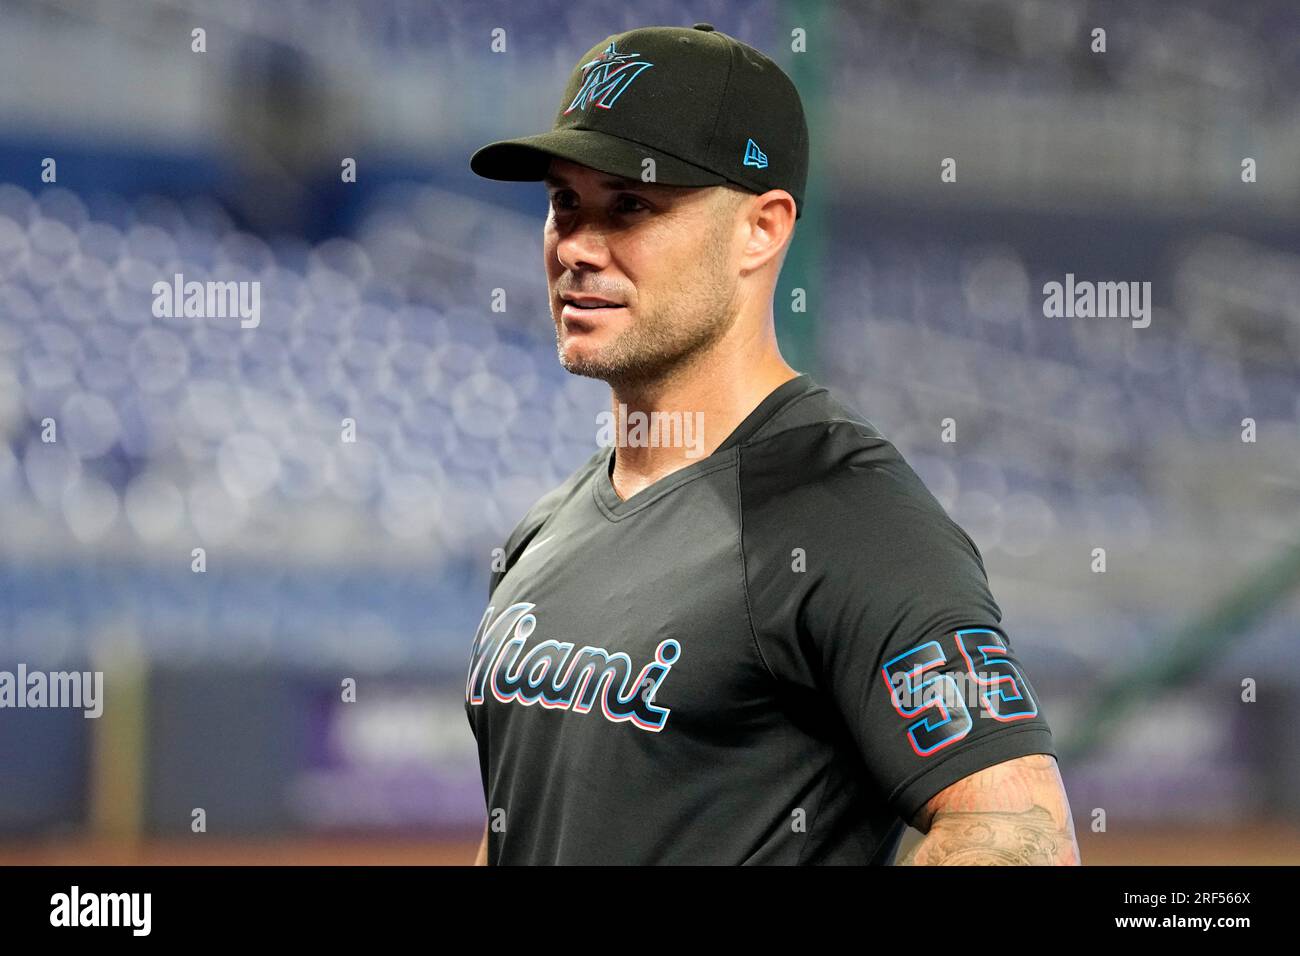 Miami Marlins manager Skip Schumaker stands on the field before a